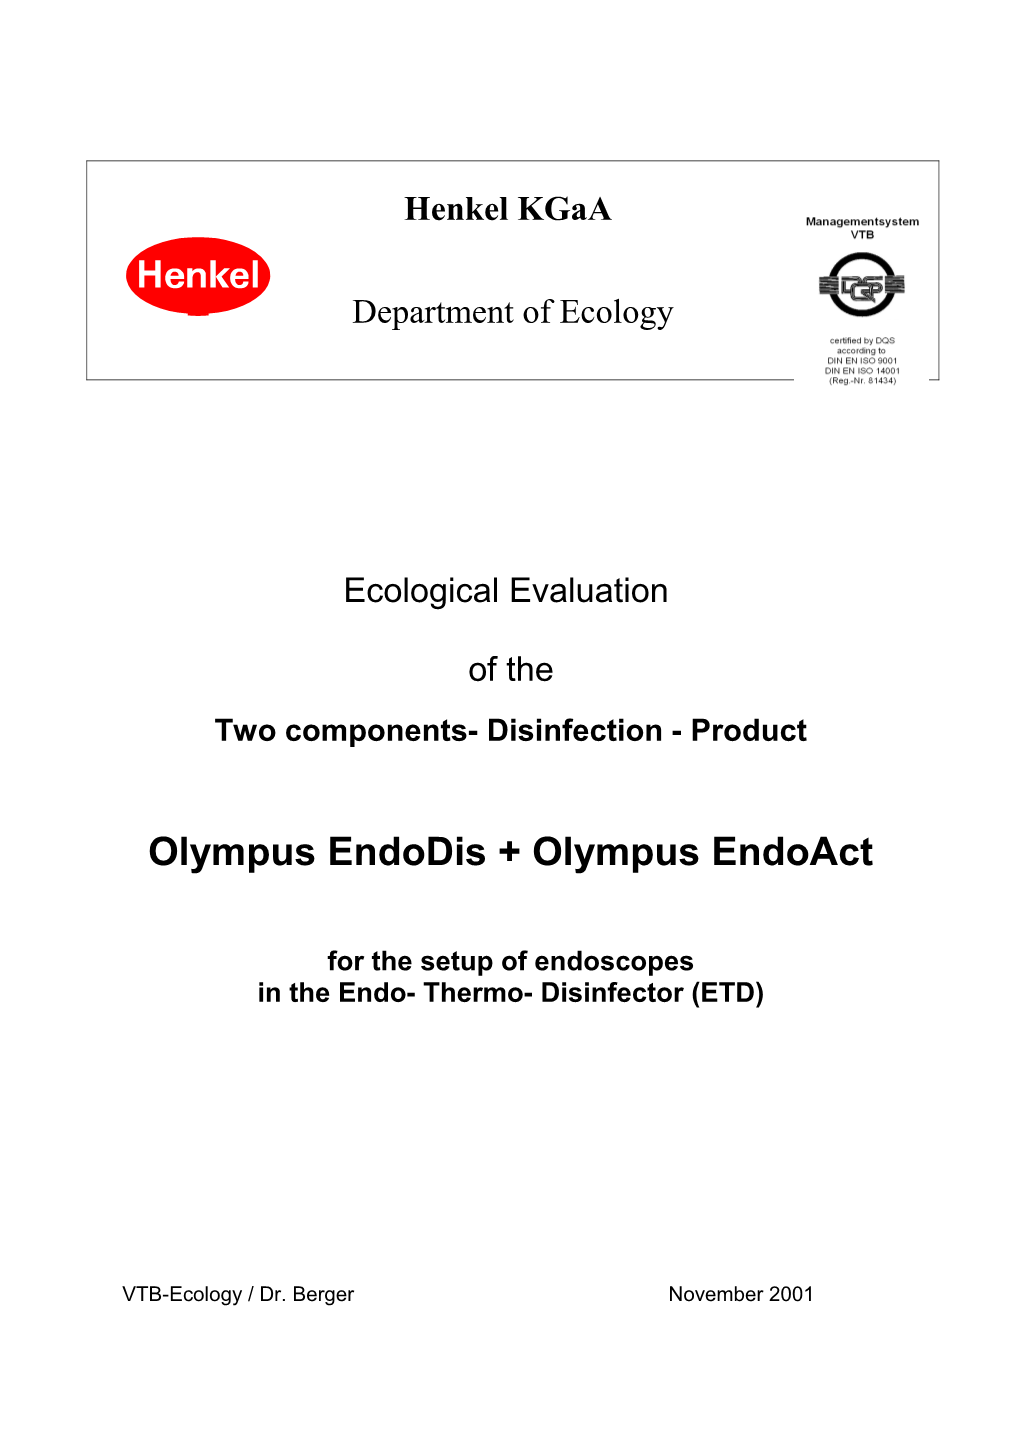 Ecological Certificate for Olympus Endodis + Olympus Endoact